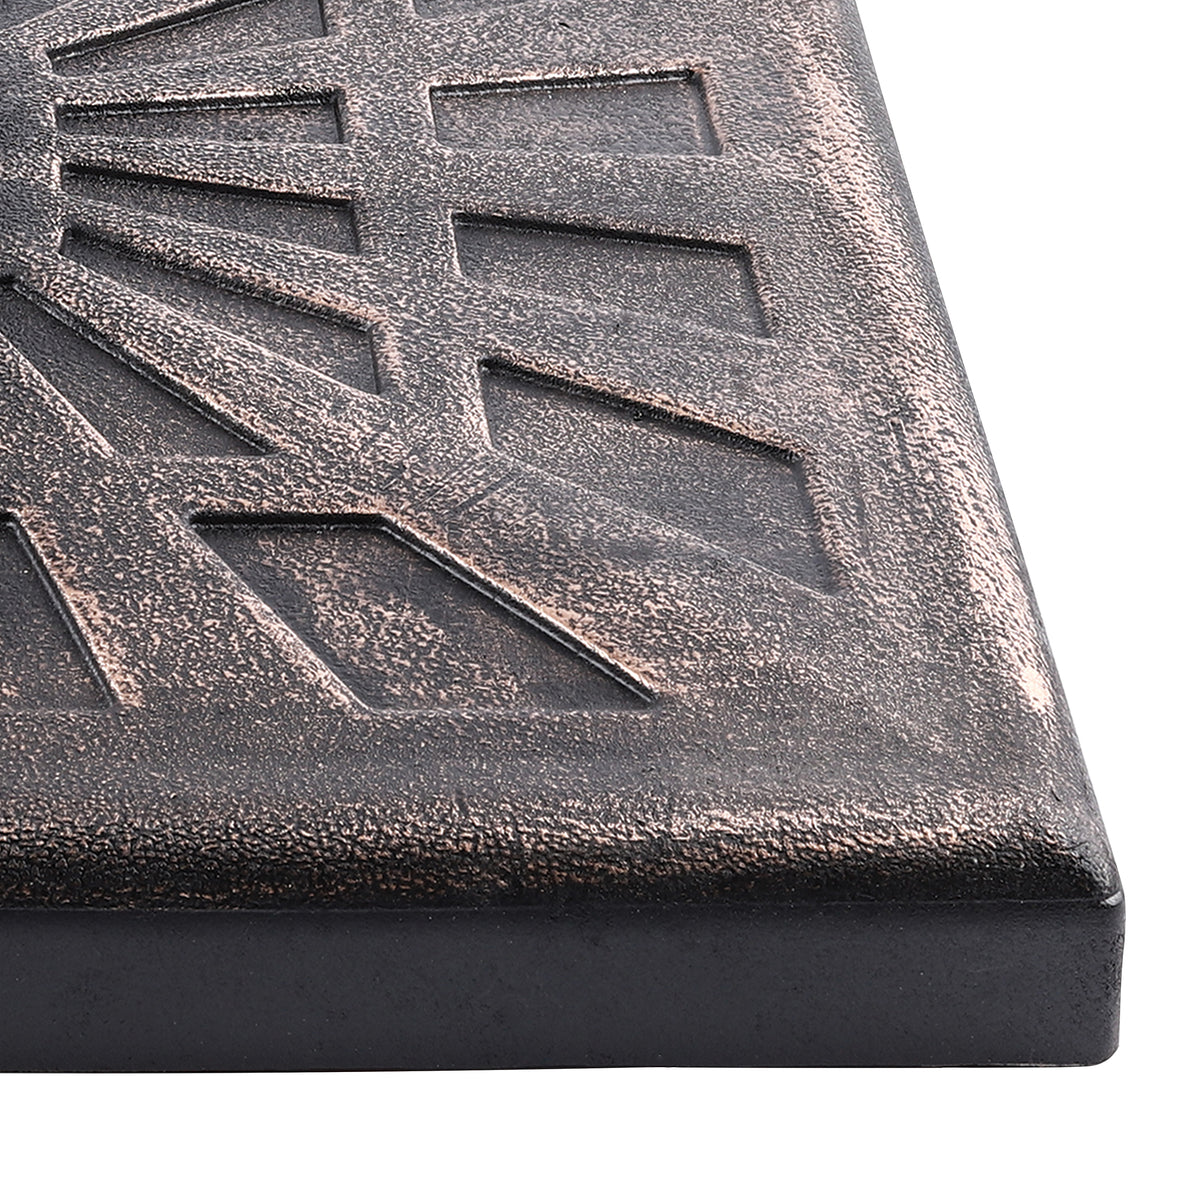 Close up of the design and color on the Bliss Outdoors 17-inch cast resin stone square Umbrella Base.